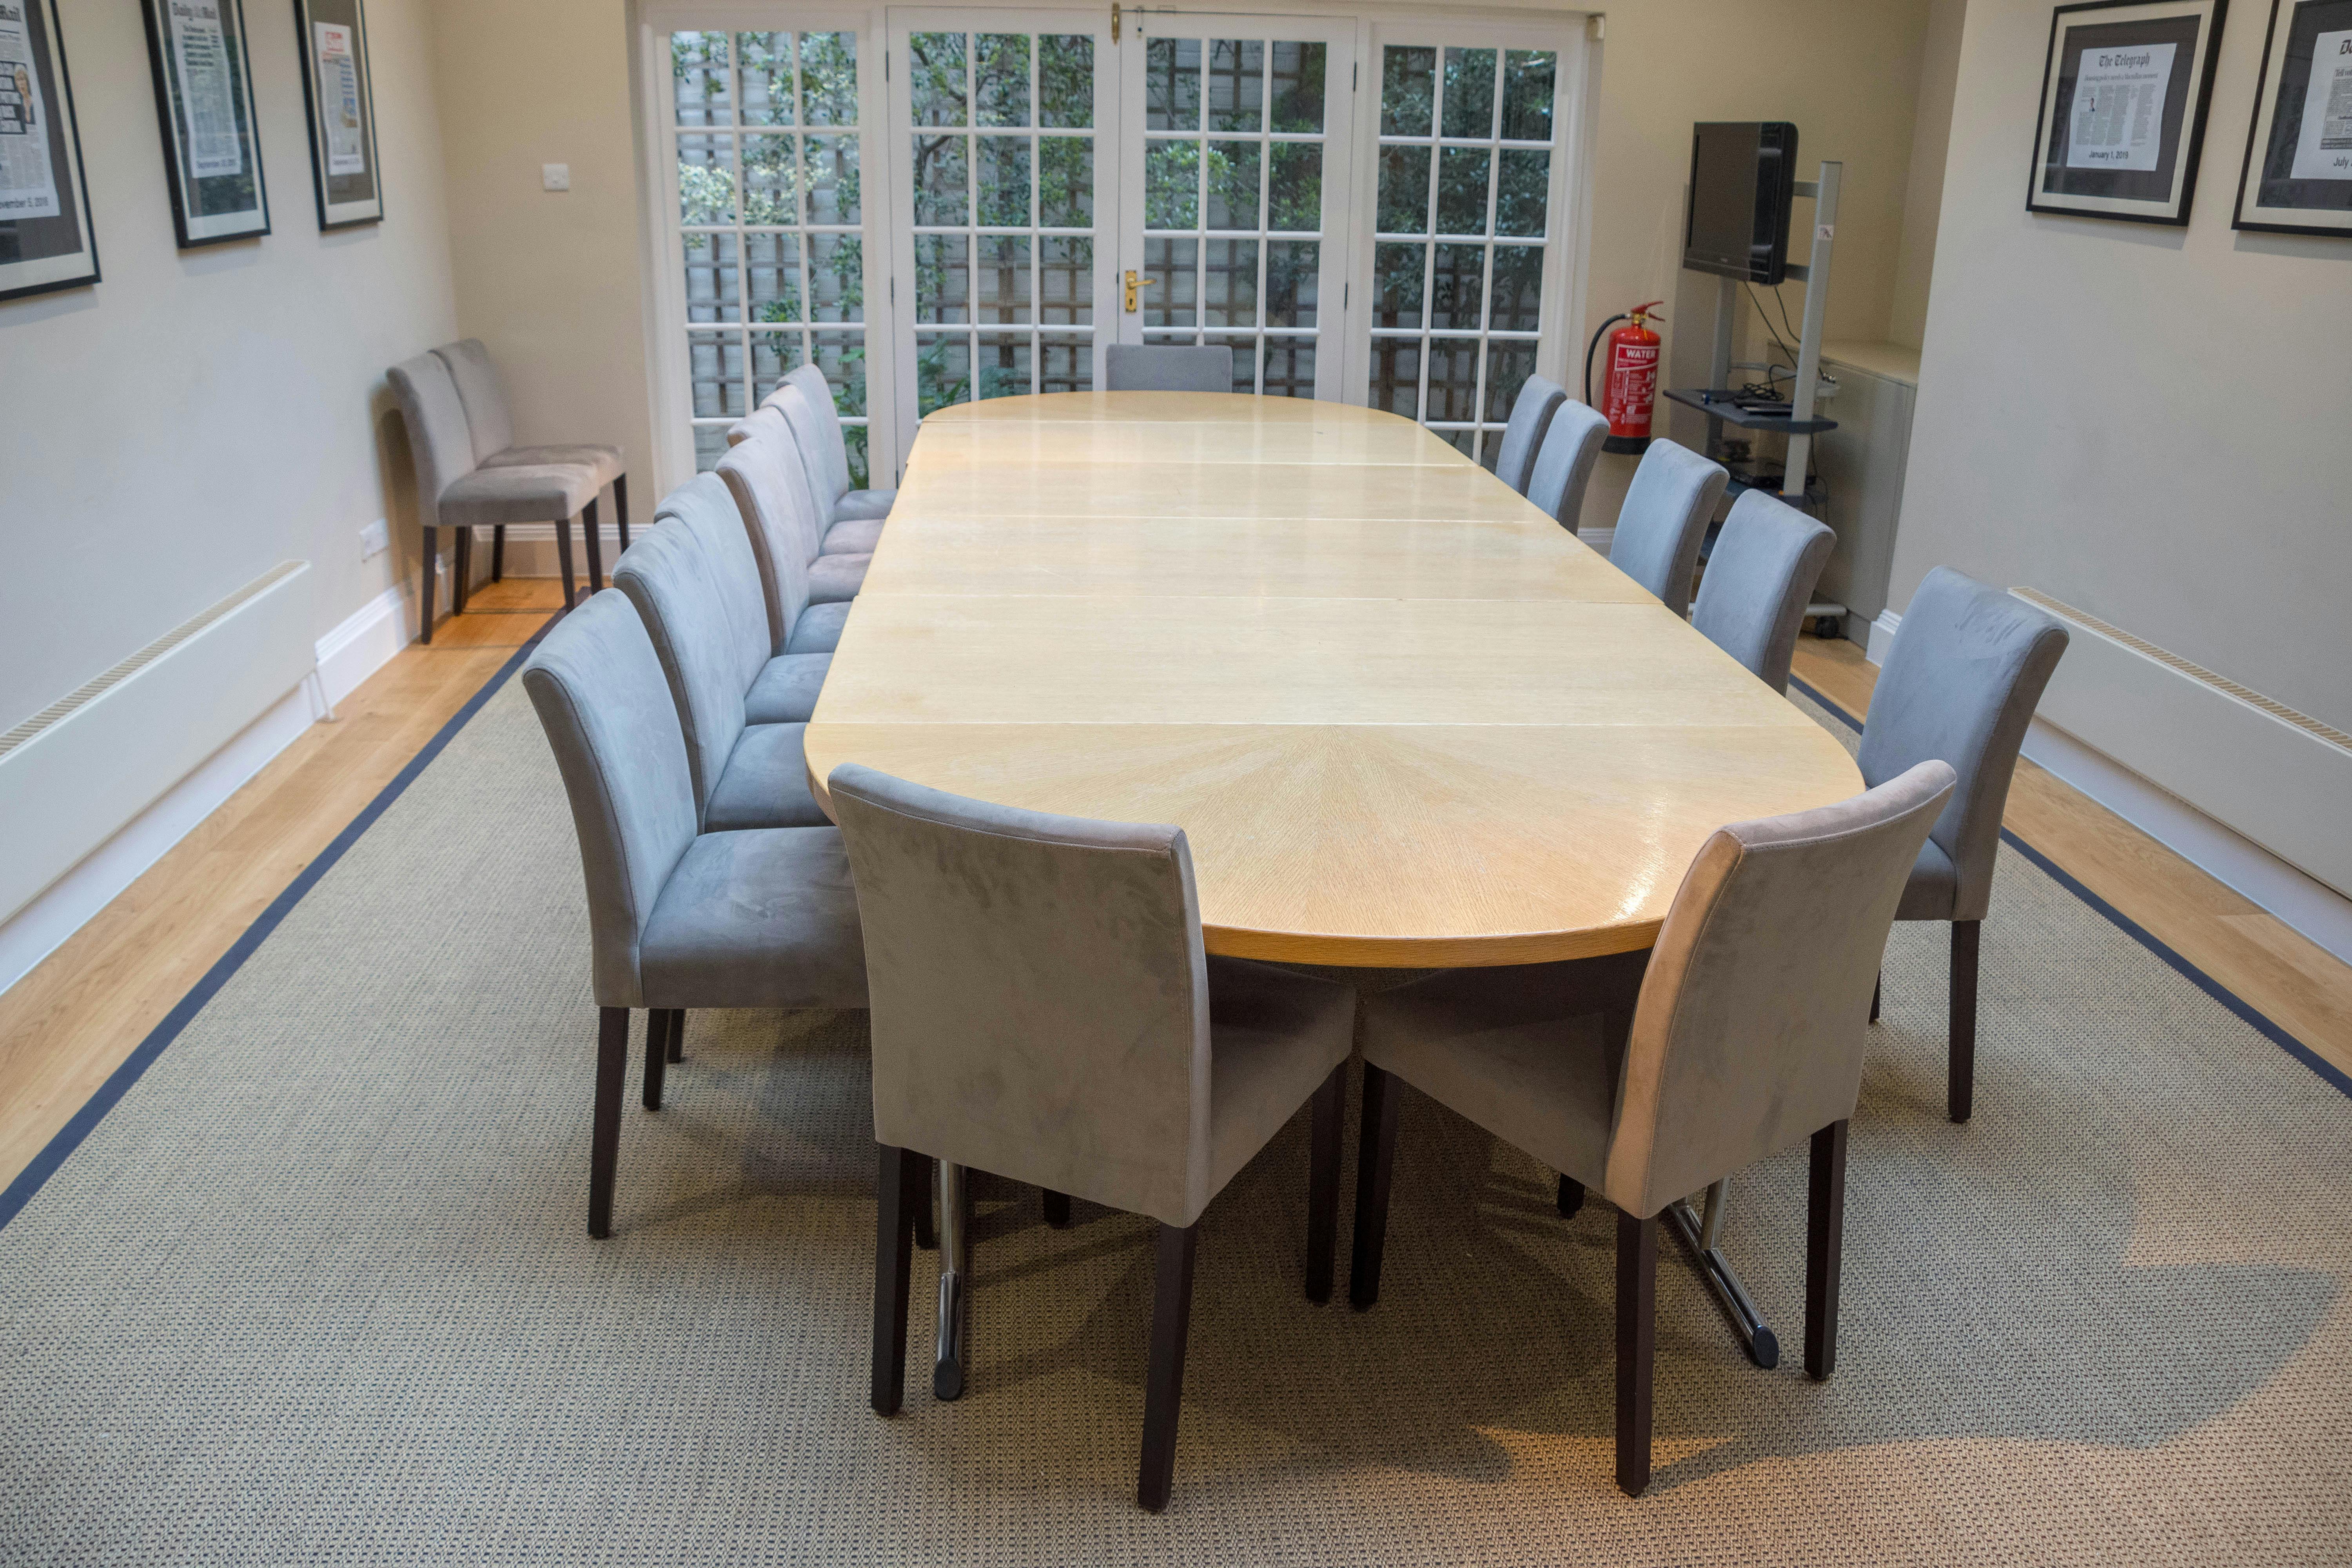 Centre for Policy Studies - Boardroom image 3